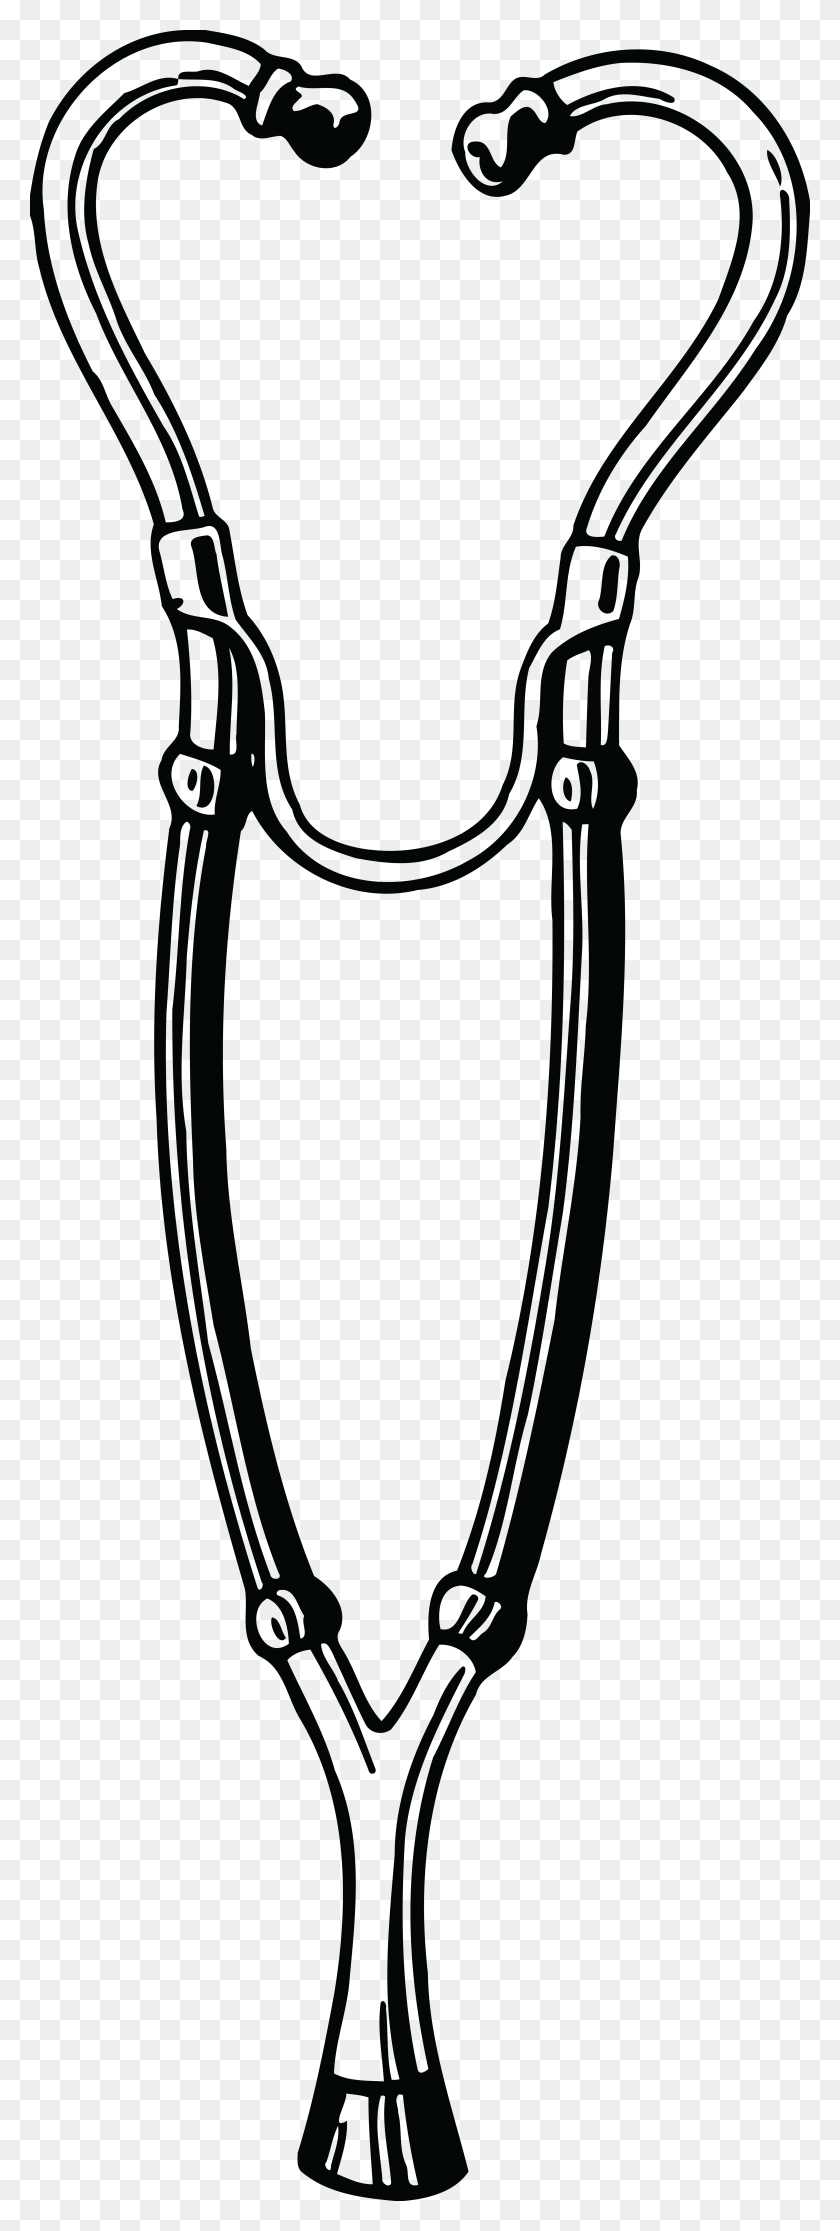 4000x11135 Free Clipart Of A Stethoscope - Stethoscope Pictures Free Clip Art